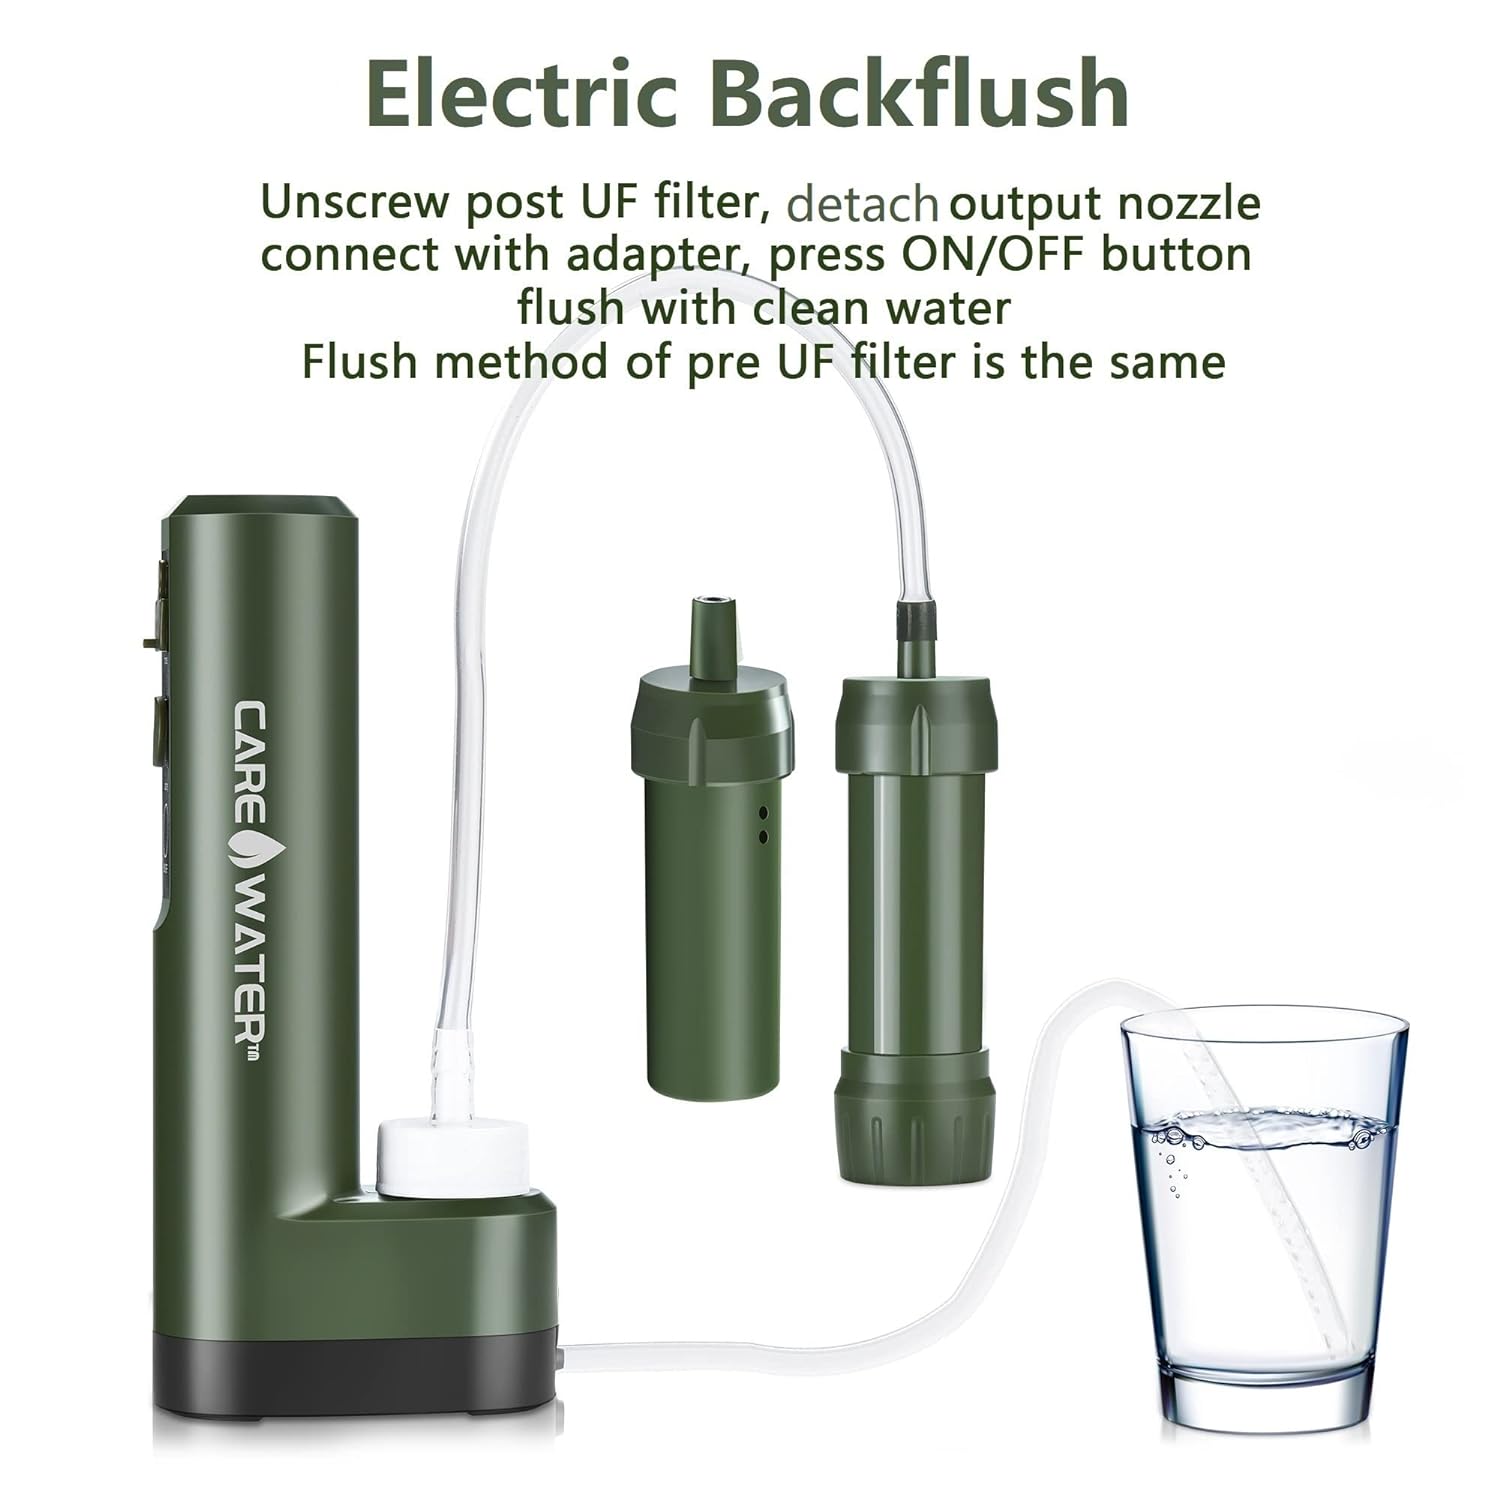 CaredWater Electric Portable Water Filter Purifier Survival for Camping Backpacking Hiking Travel, Water Filtration System Survival Gear with Backup Option and Emergency Phone Charger Namiedstore